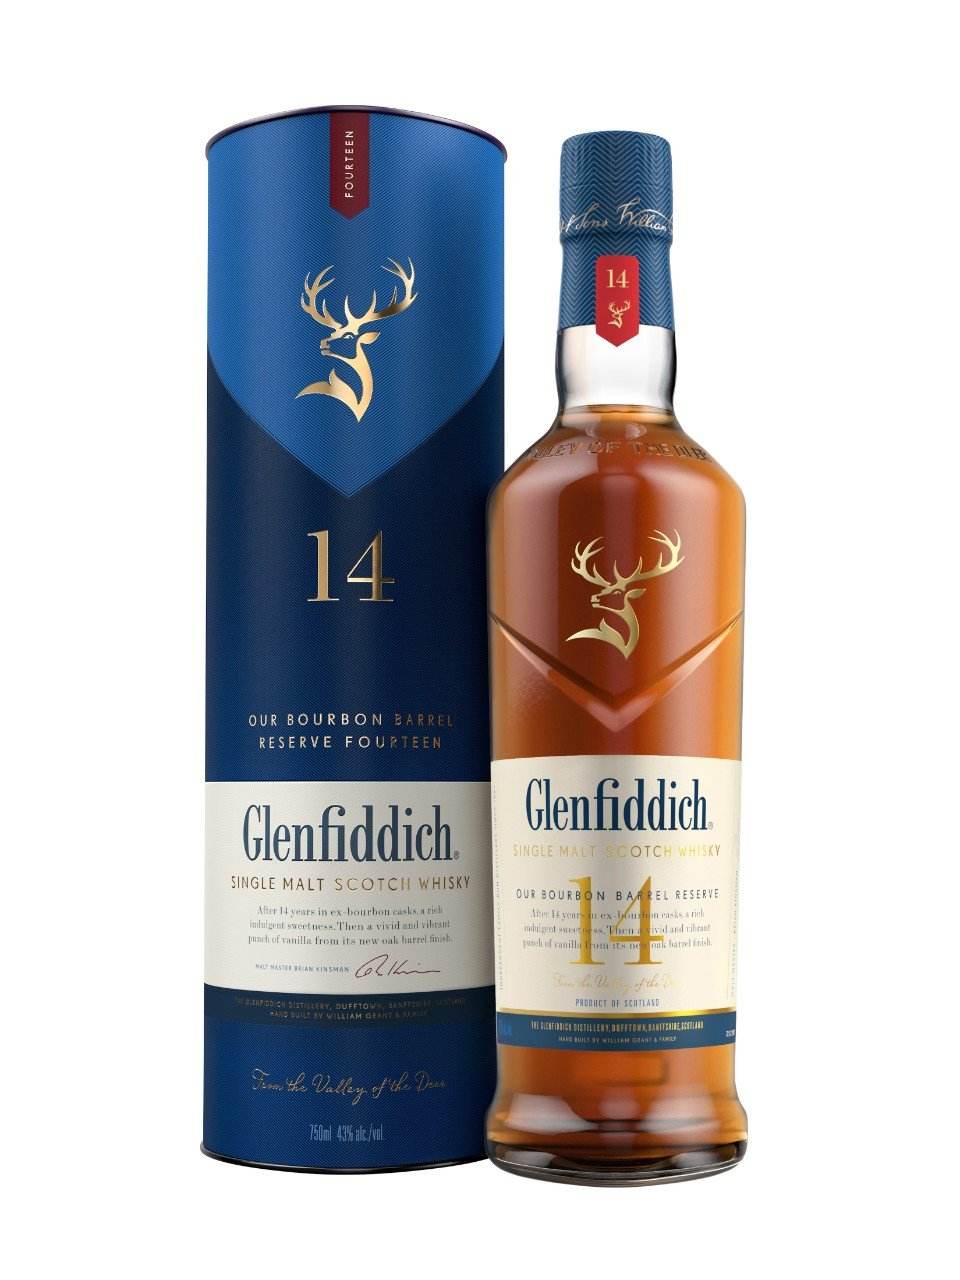 Glenfiddich 14 Year Old Bourbon Barrel Reserve | Exquisite Wine & Alcohol Gift Delivery Toronto Canada | Vyno